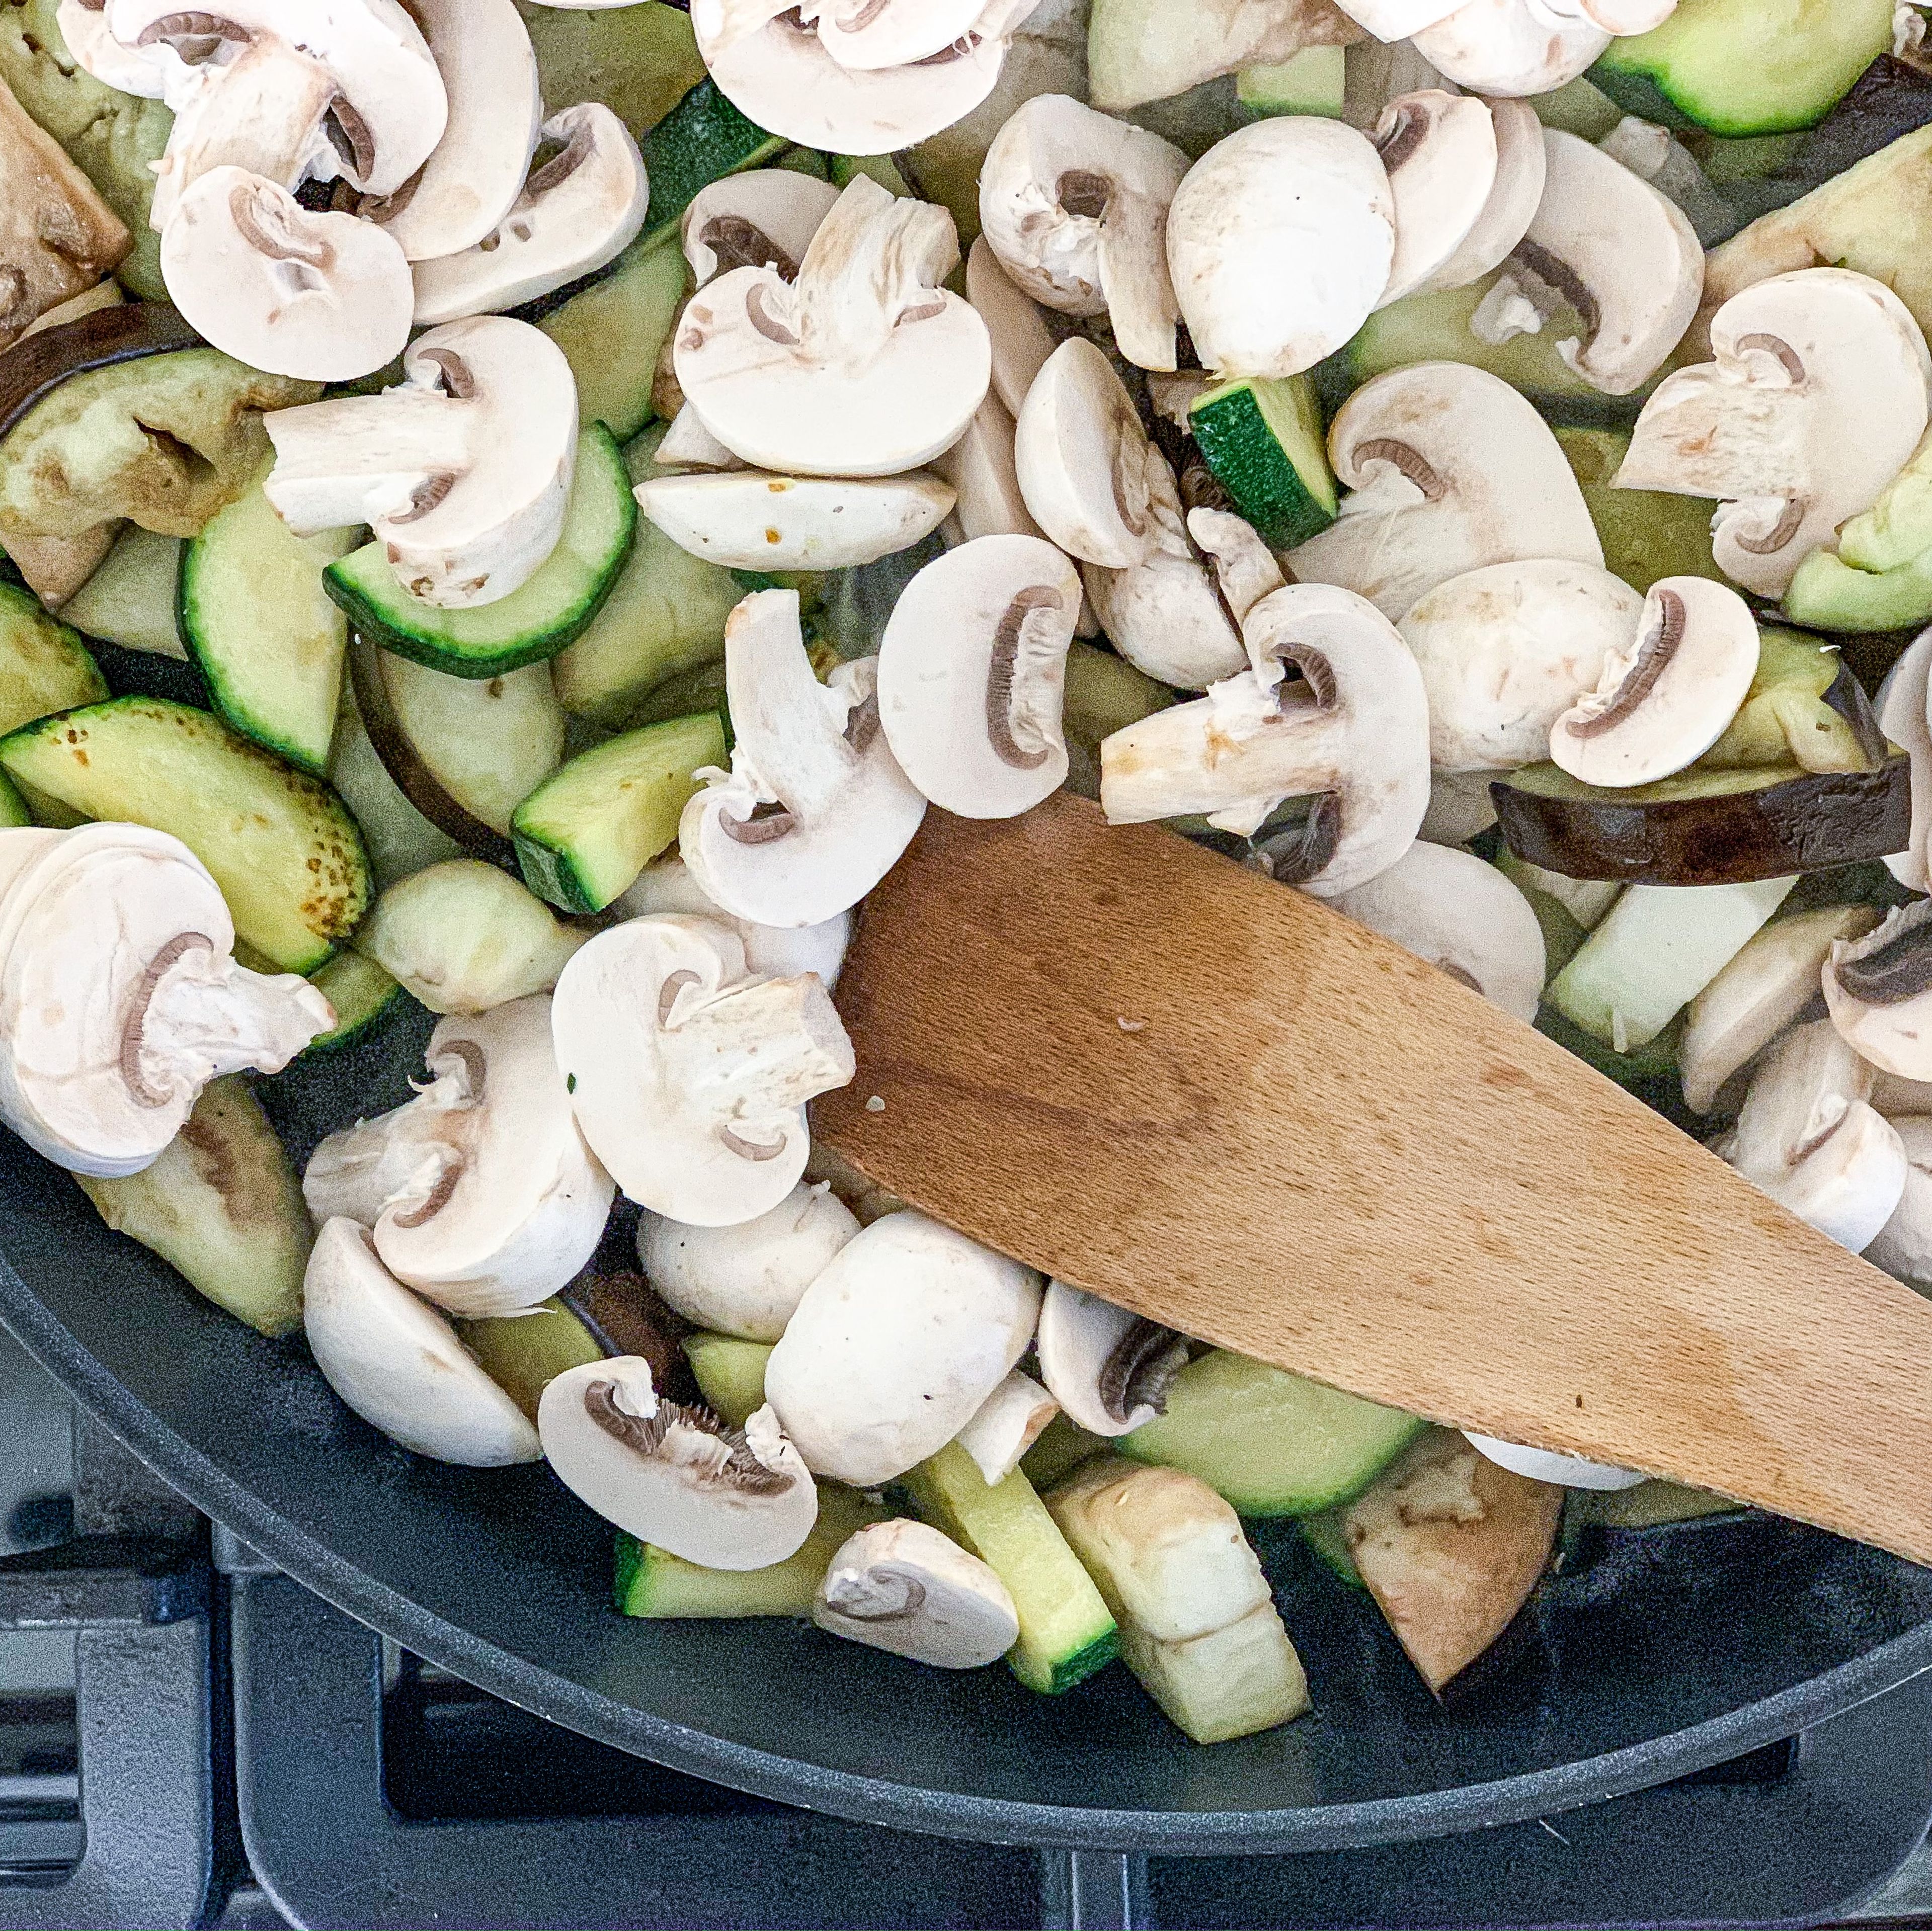 Place Zucchini and Eggplant in frying pan with olive oil. 5 minutes later add mushrooms to the pan.